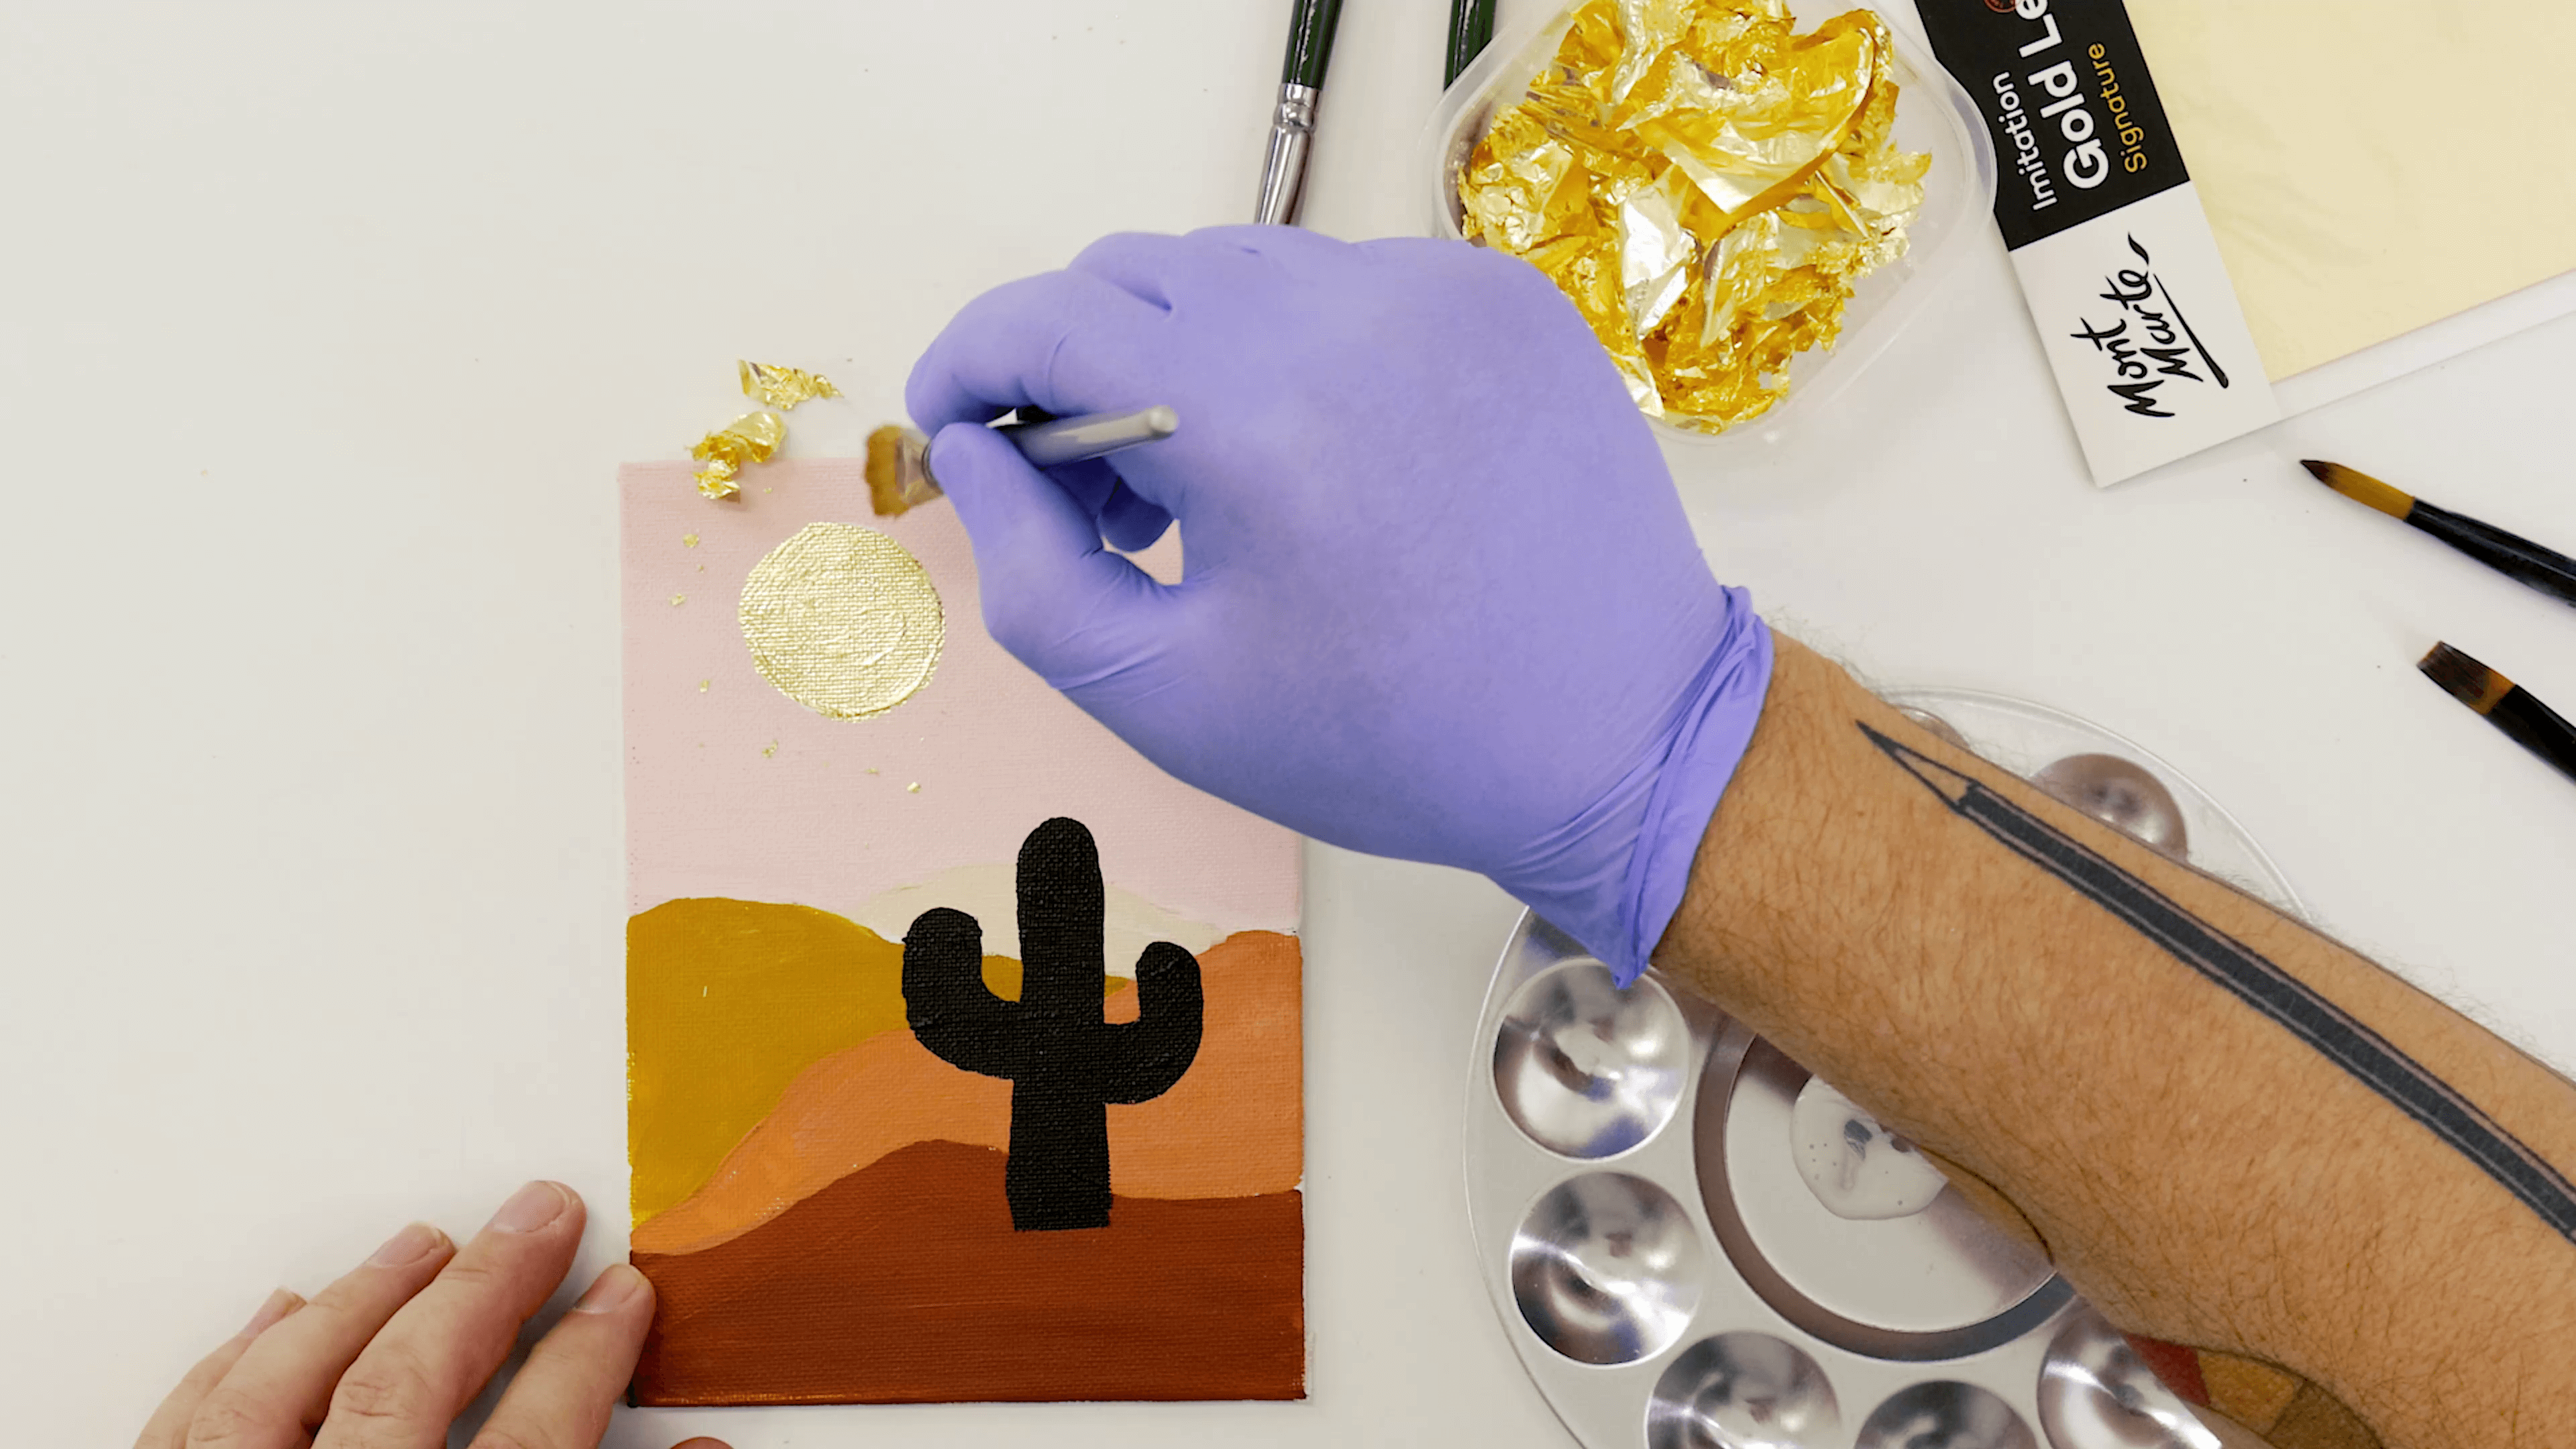 Hand placing gold leaf in a small surface area on a gouache artwork.